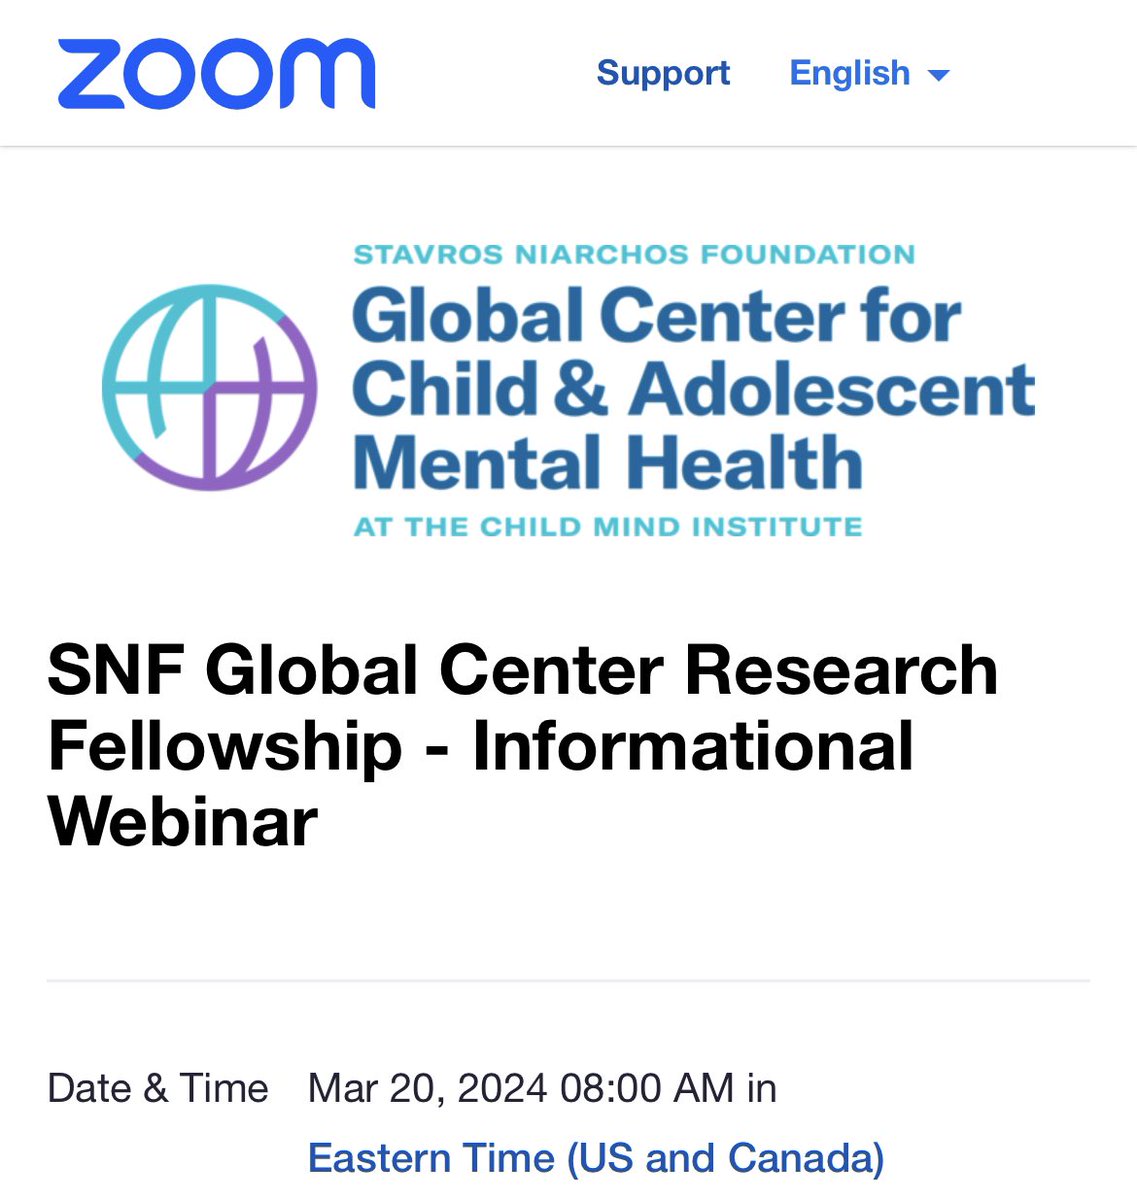 Worldwide 🌍 #research colleagues are invited to join an informational webinar on the inaugural SNF Global Center Research Fellowships, 3/20/24!  This Fellowship supports early career researchers in child & adolescent #mentalhealth in LMICs.  Register: childmind.zoom.us/webinar/regist…